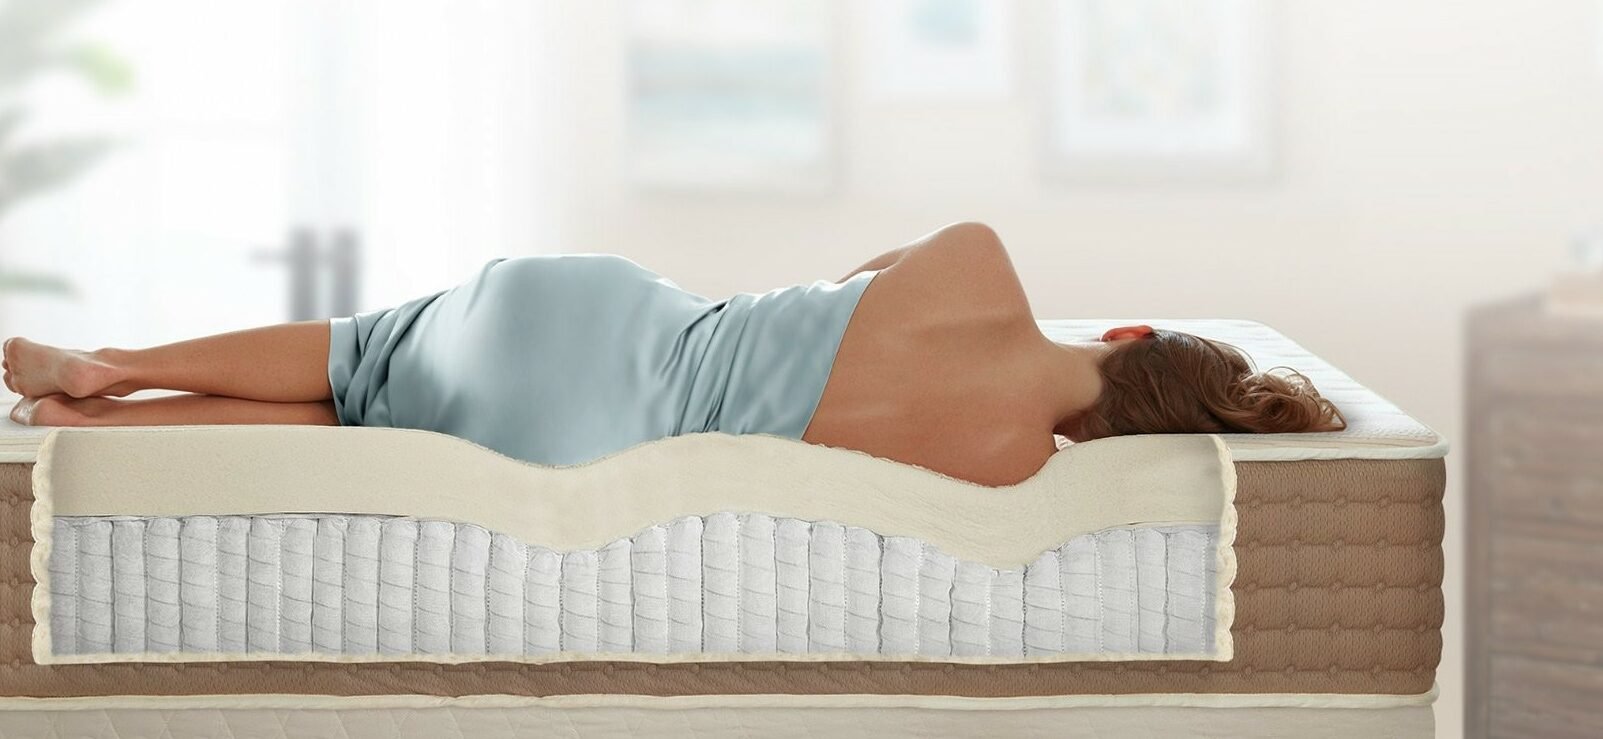 Woman lying on her side on a mattress showing how the mattress conforms well to the shape of her body